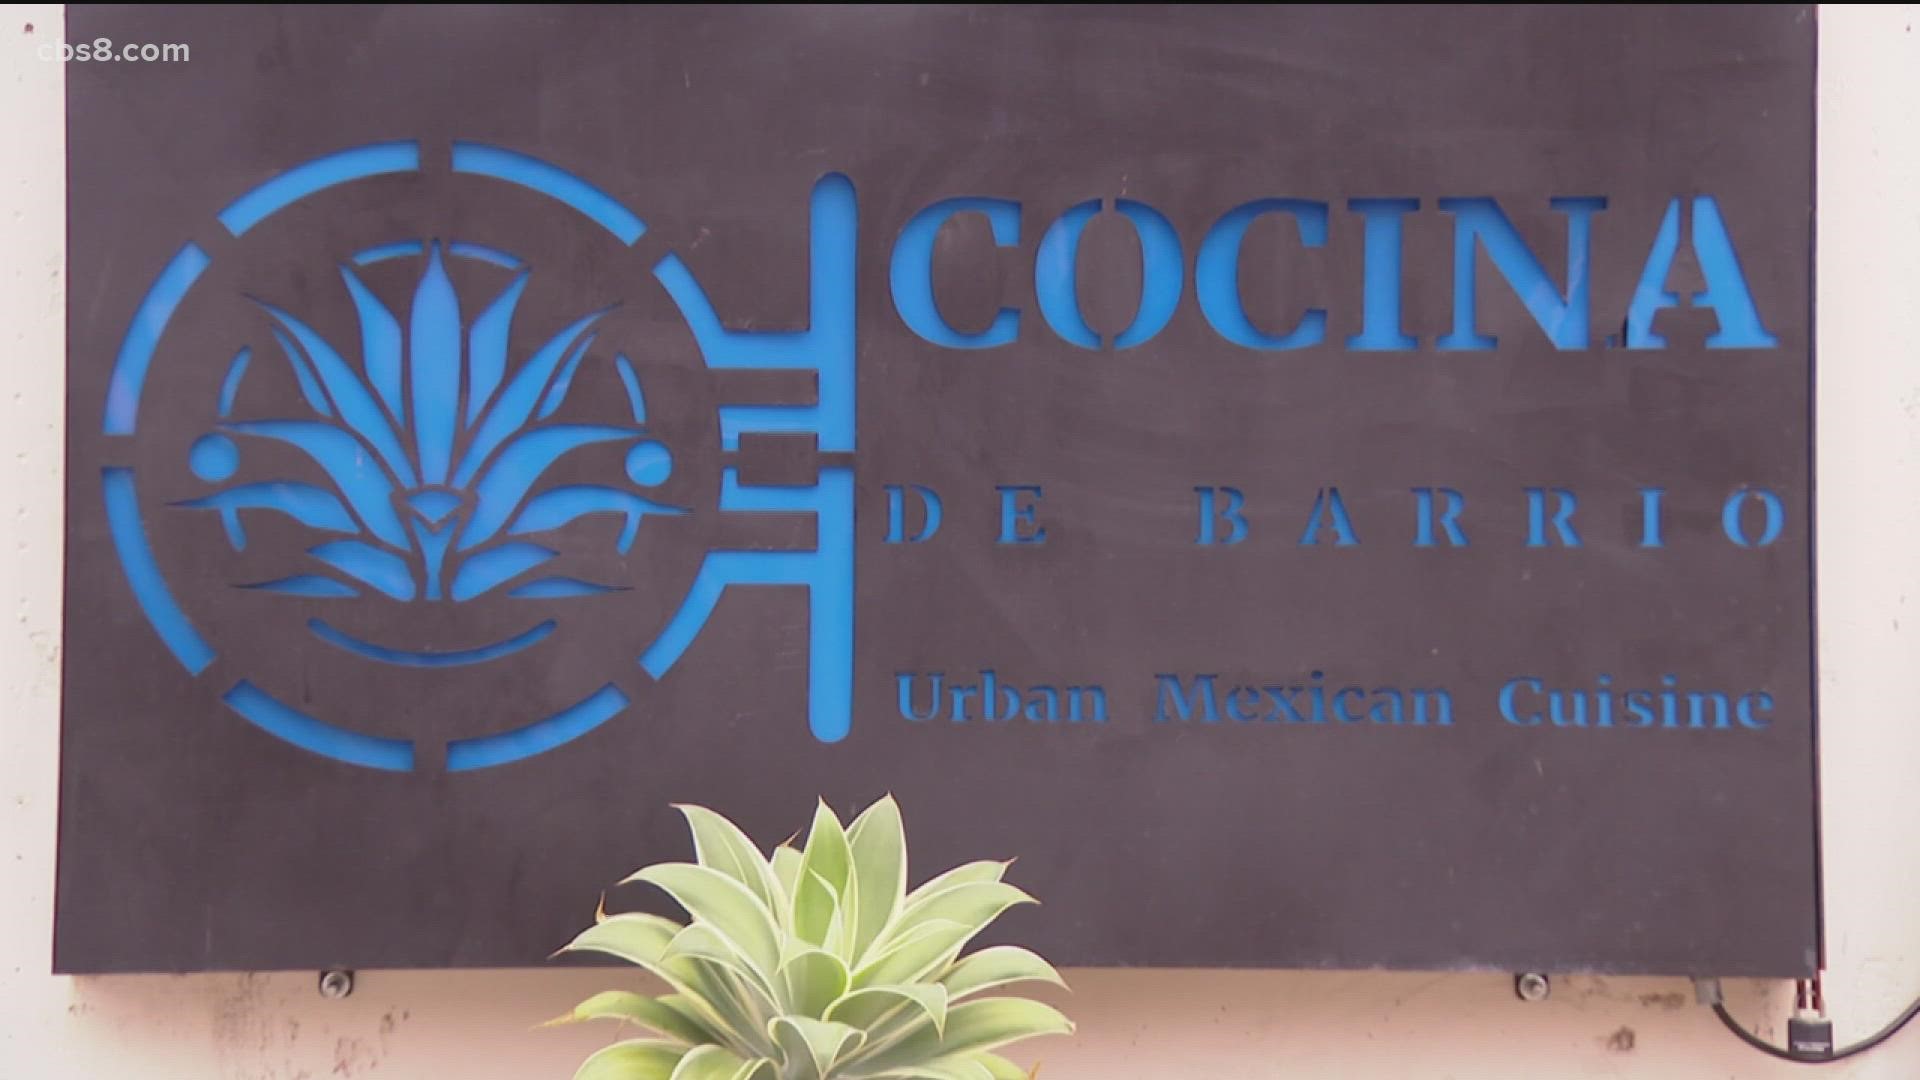 Cocina De Barrio in Hillcrest is a Mexican restaurant and they say the food is truly authentic.